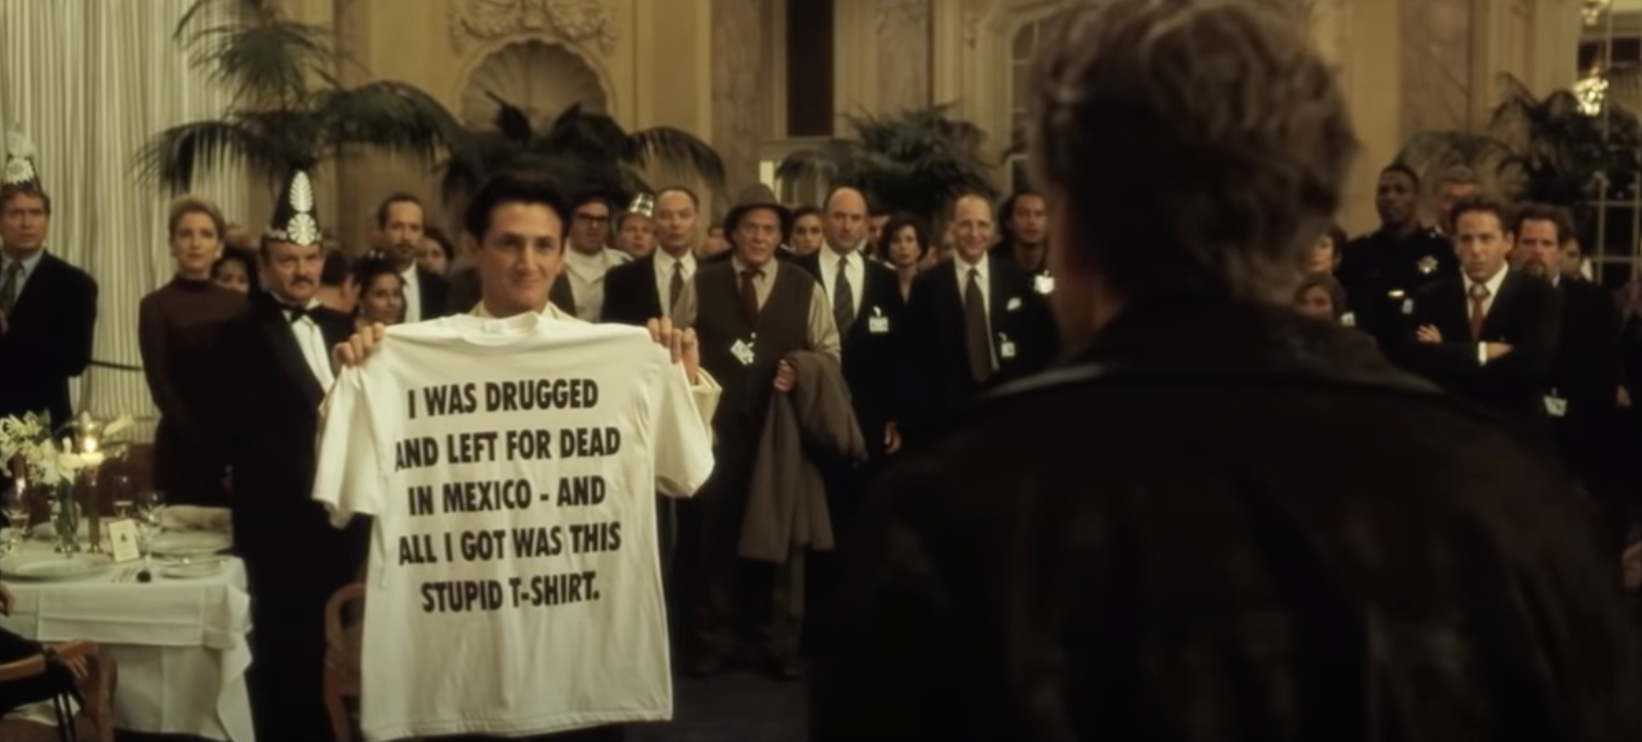 A man at a party holding up a shirt that reads: &quot;I was drugged and left for dead in Mexico, and all I got was this stupid t-shirt&quot;